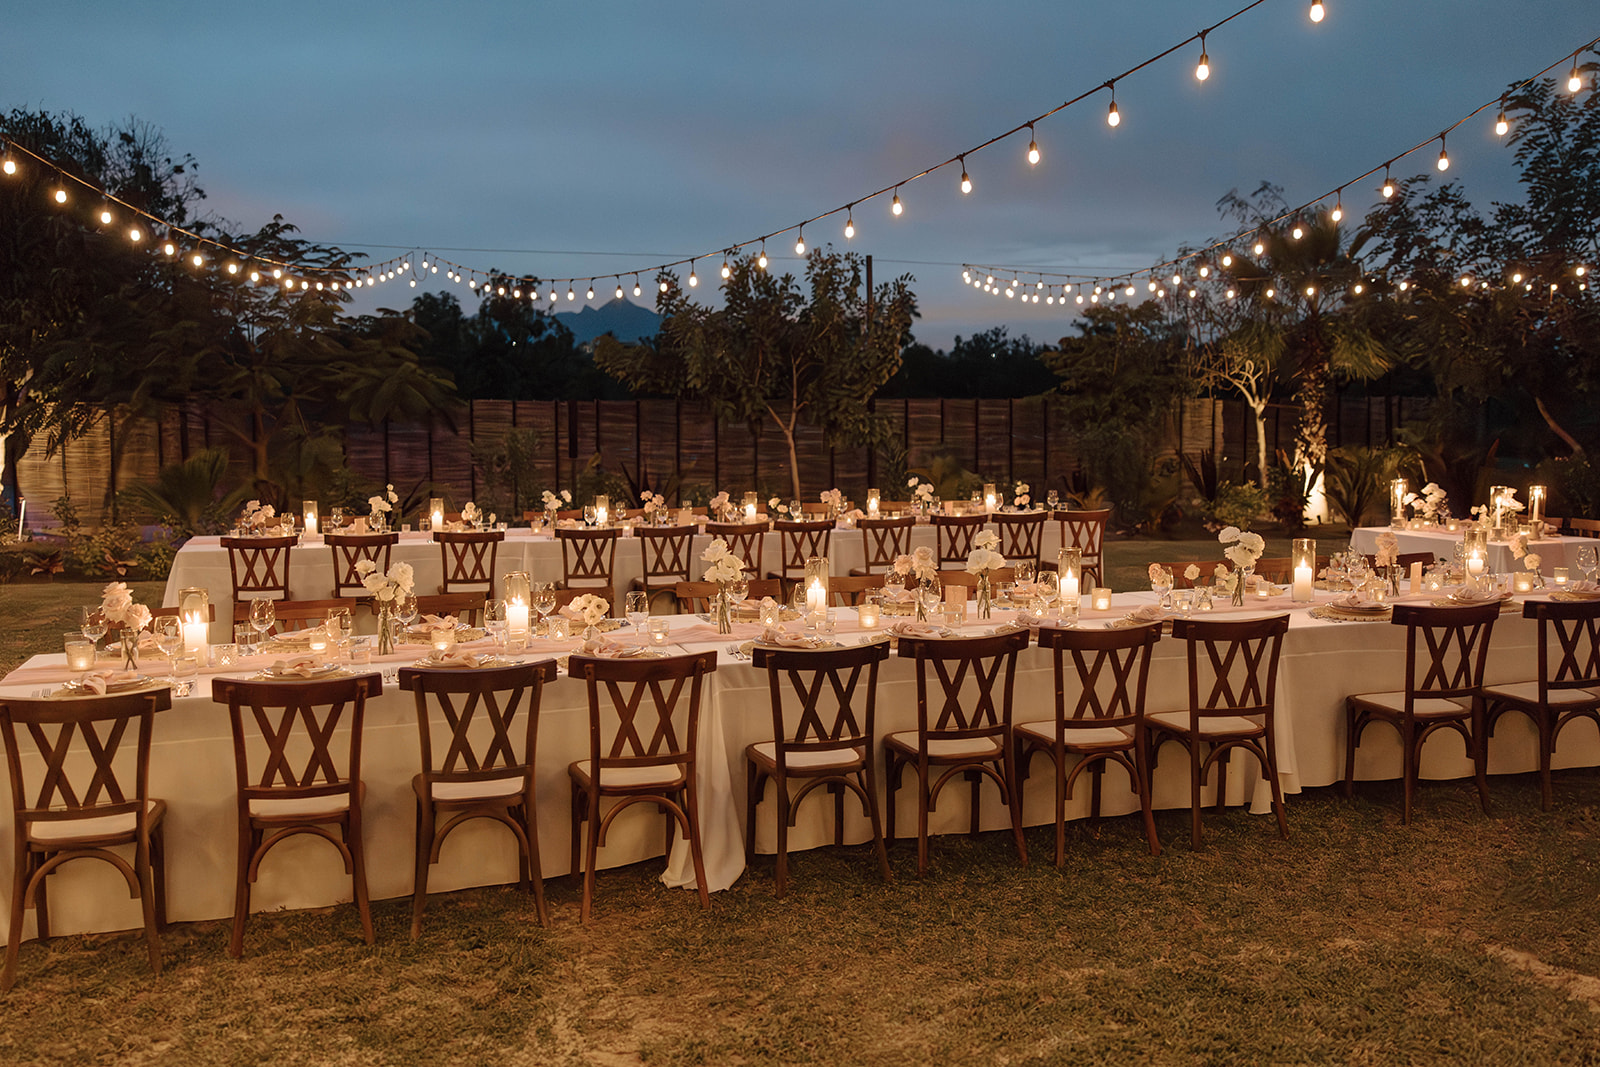 An elegantly set outdoor dining table with a white tablecloth and floral decorations under string lights at a Cabo San Lucas wedding